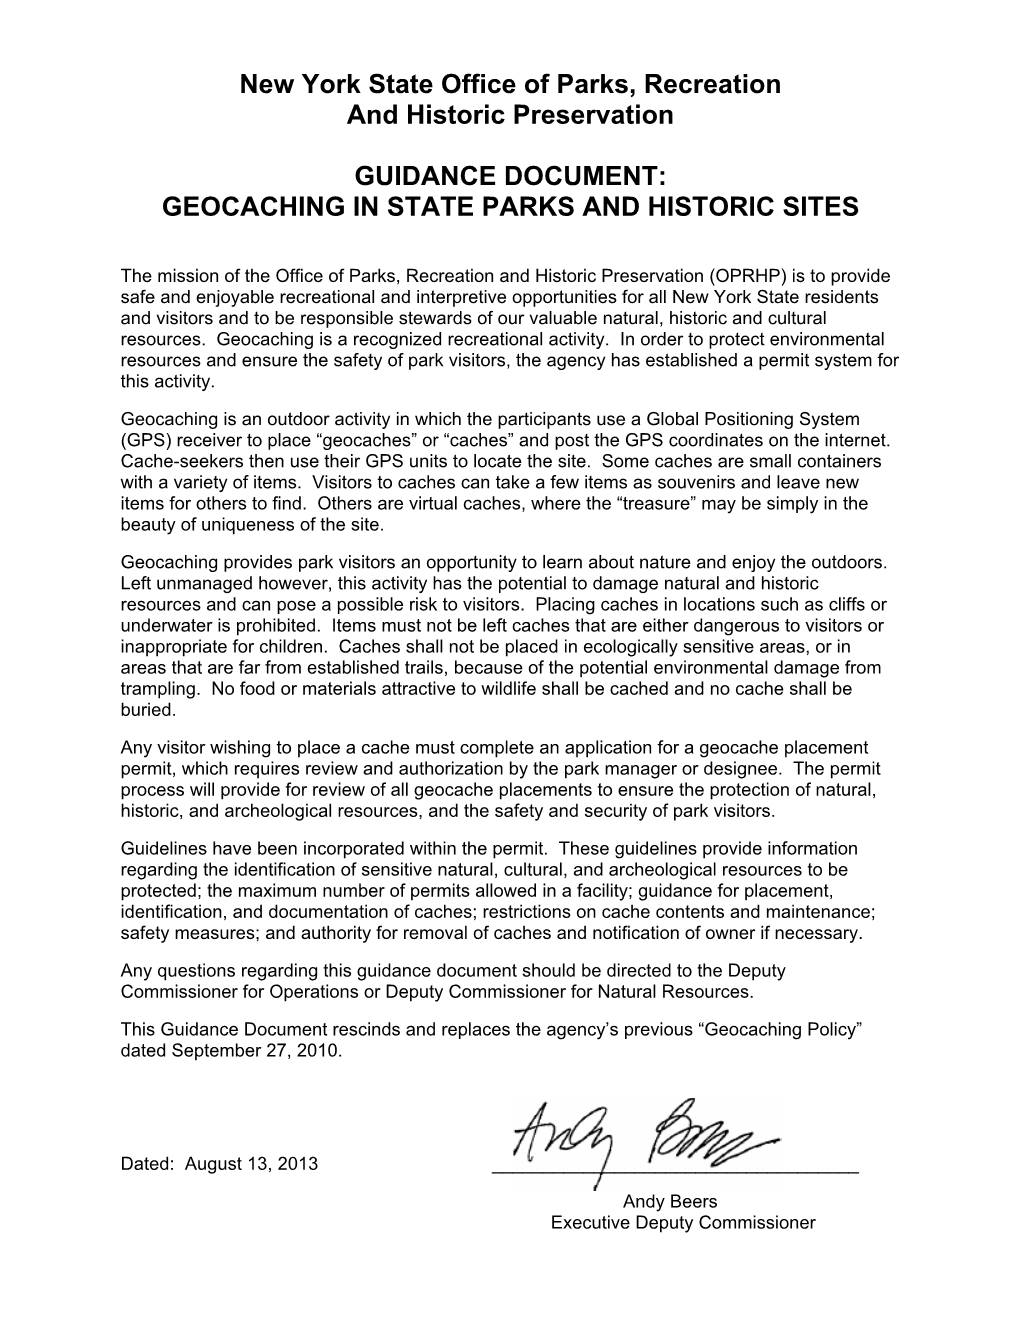 Guidance Document: Geocaching in State Parks and Historic Sites